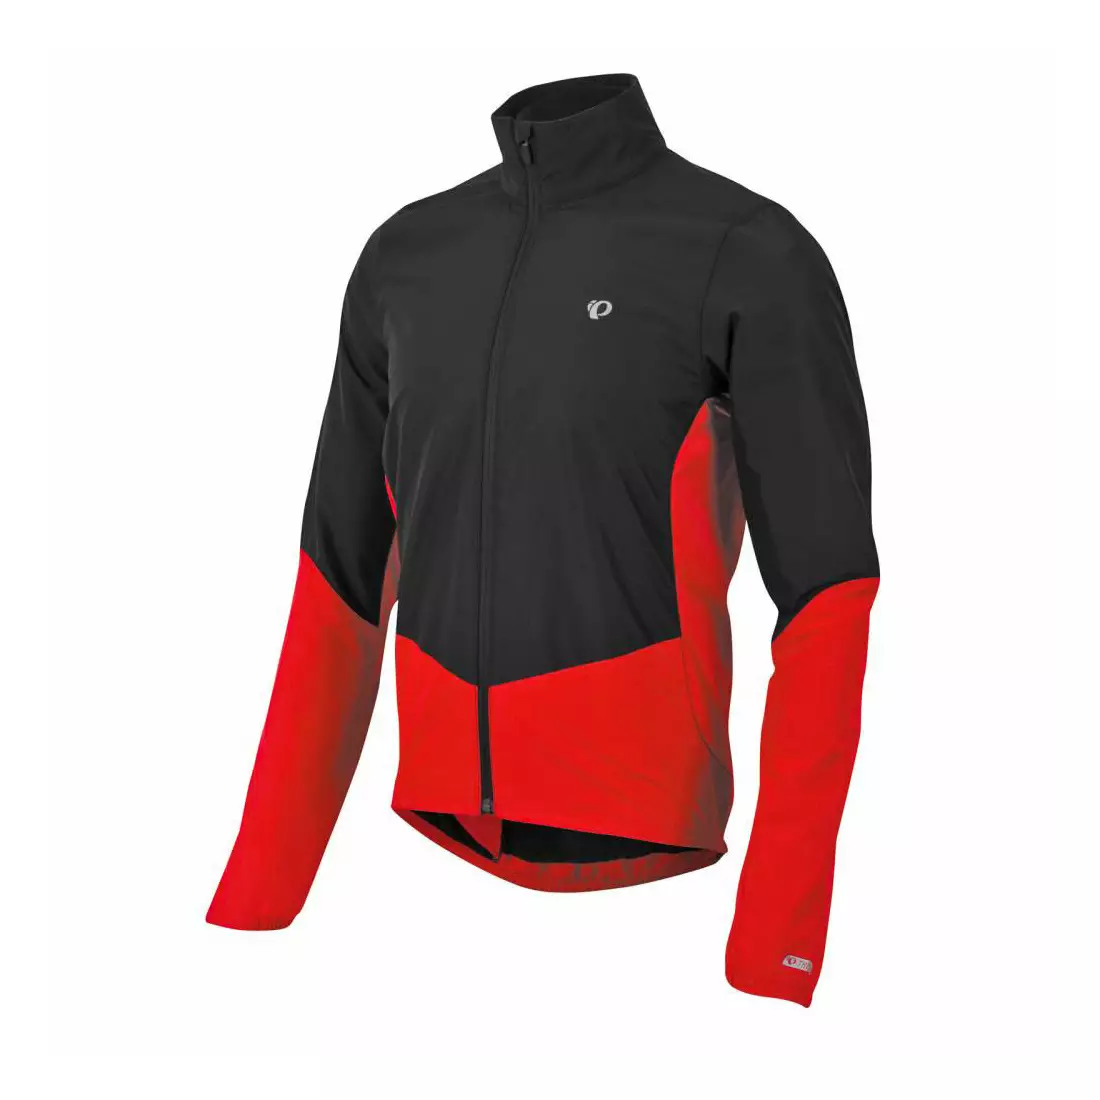 PEARL IZUMI Select Thermal Barrier 11131411-2FK - men's cycling jacket, color: black and red